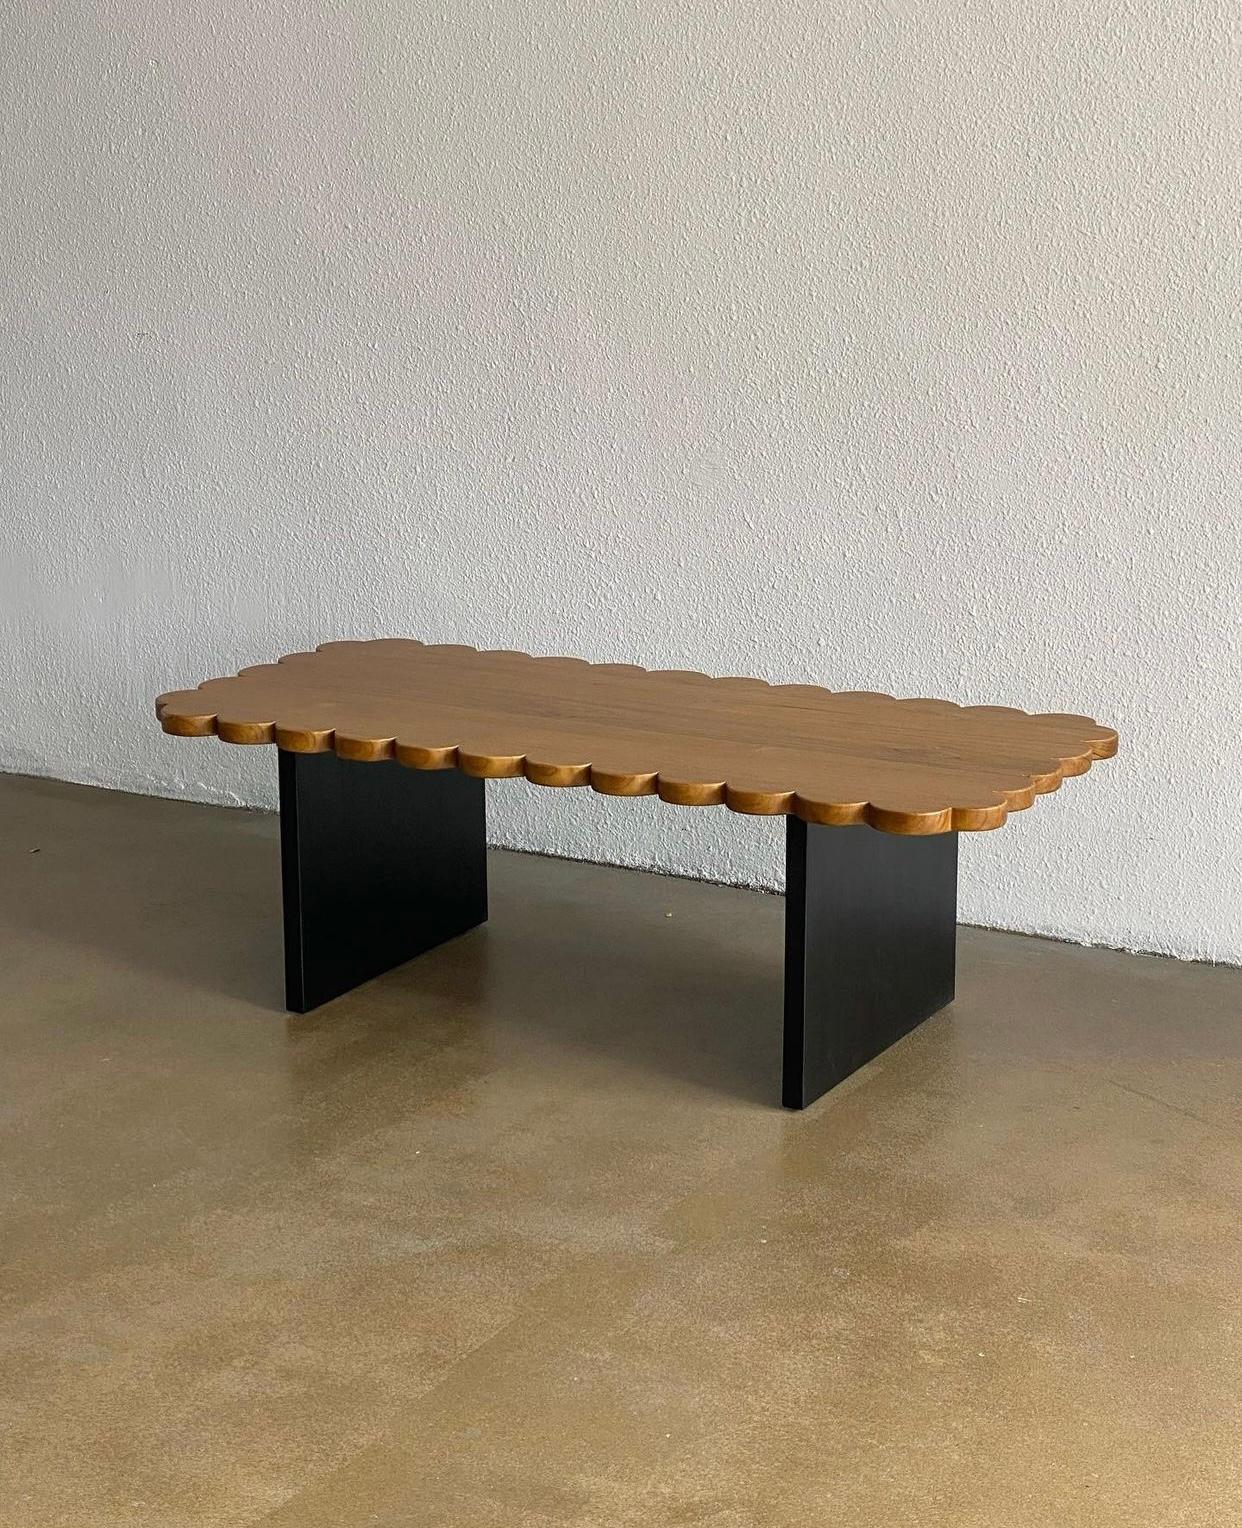 Biskut Coffee Table by Studio Kallang
Dimensions: W 130 x D 60 x H 42 cm
Materials: Solid Sungkai.
Finish: Natural, Matte Black.

STUDIO KALLANG IS A SINGAPORE AND SEATTLE BASED PROJECT FOCUSING ON OBJECTS DESIGNED BY FAEZAH SHAHARUDDIN.
PIECES ARE